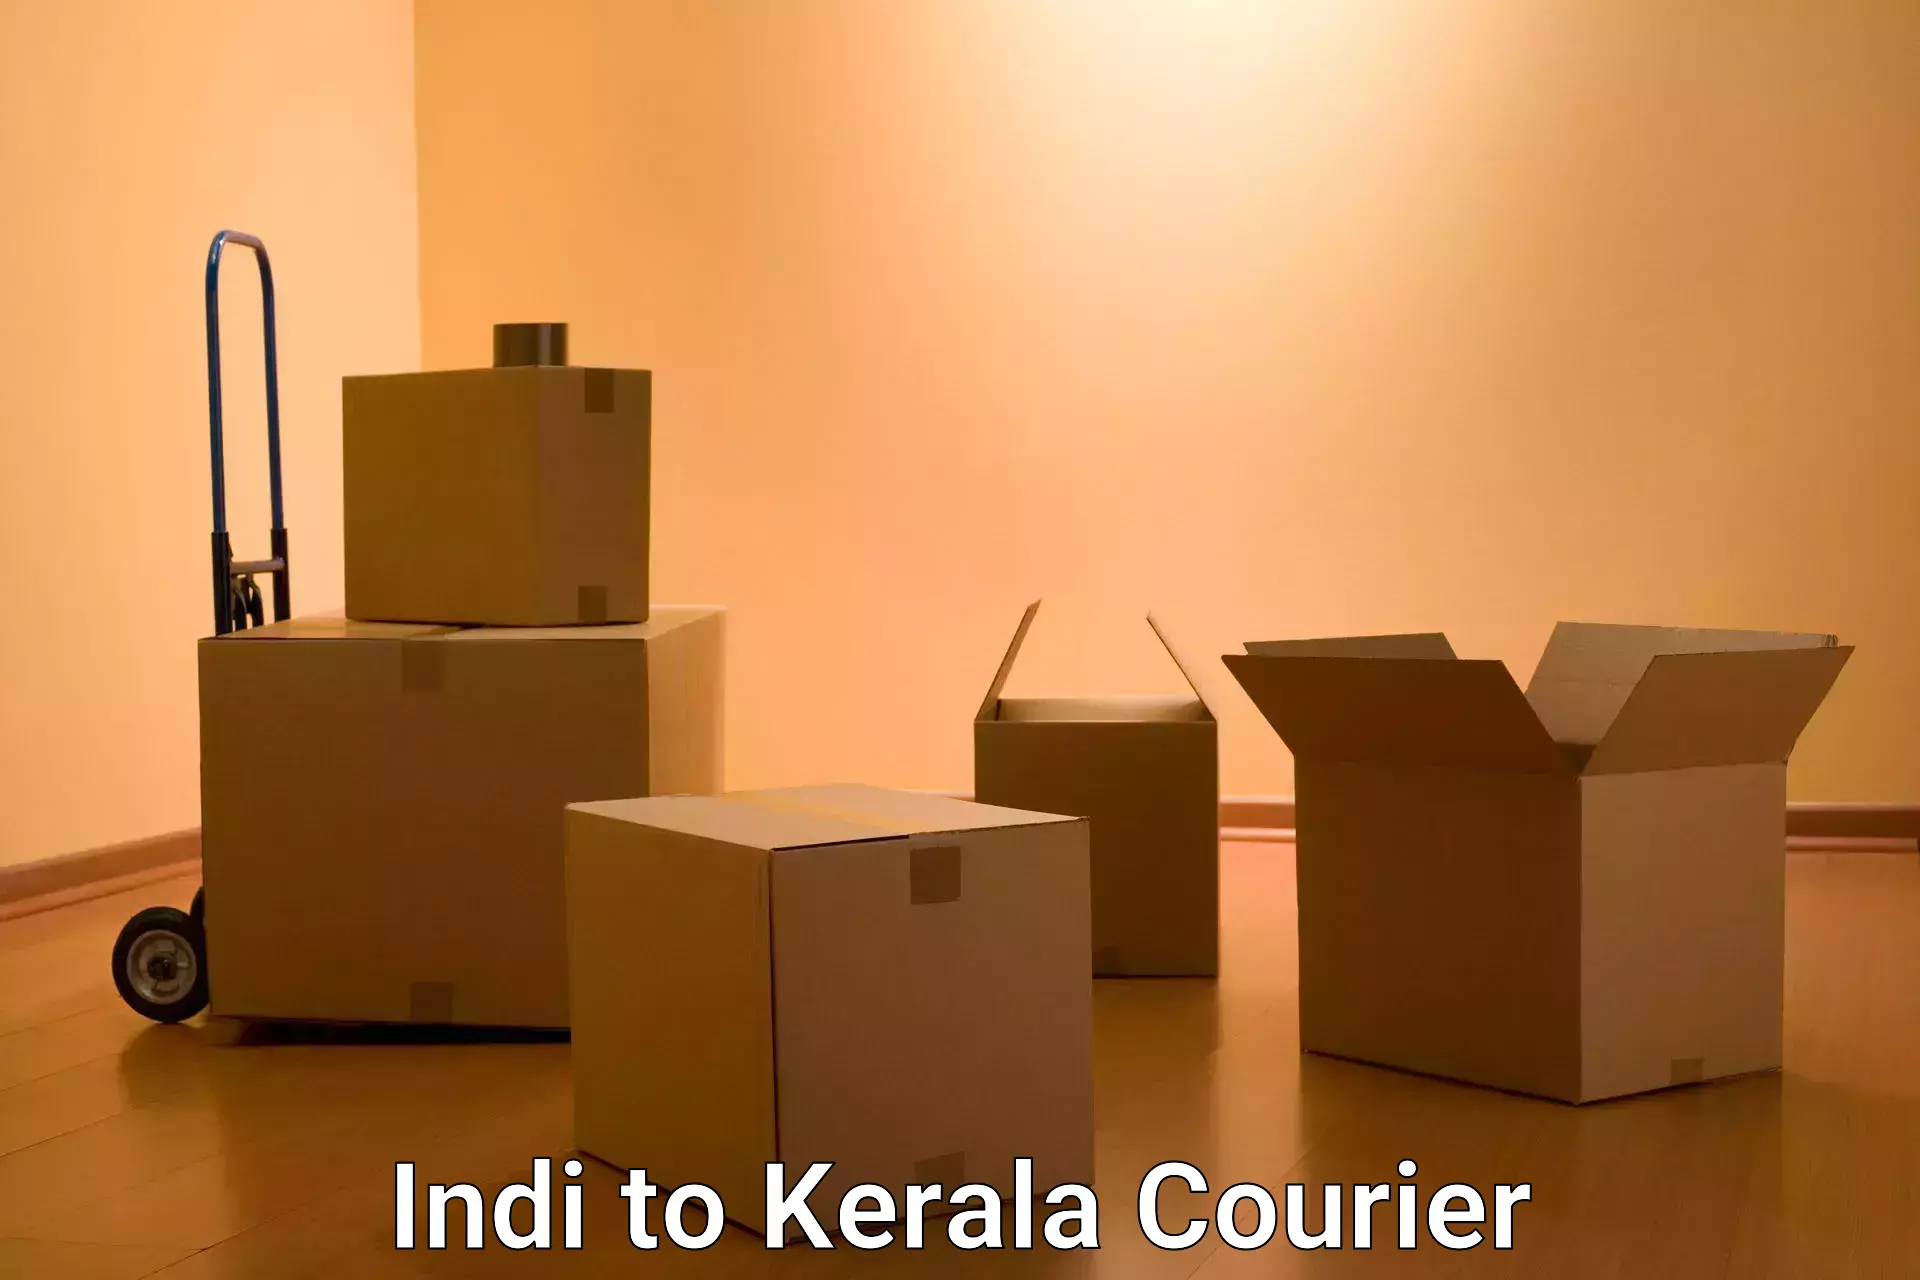 On-demand delivery in Indi to Cochin Port Kochi